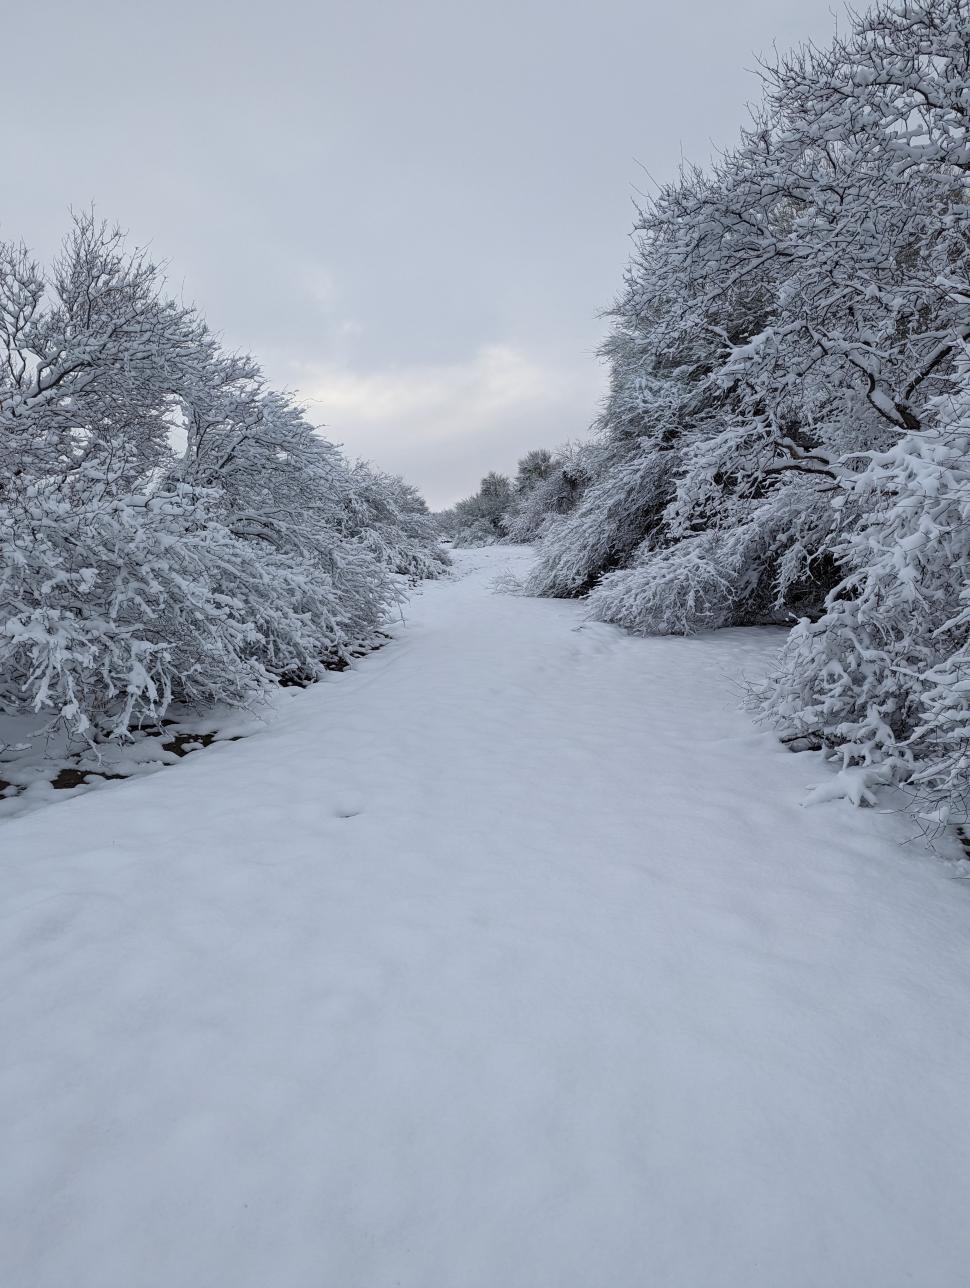 Free Image of Snow Covered Road Surrounded by Trees and Bushes 